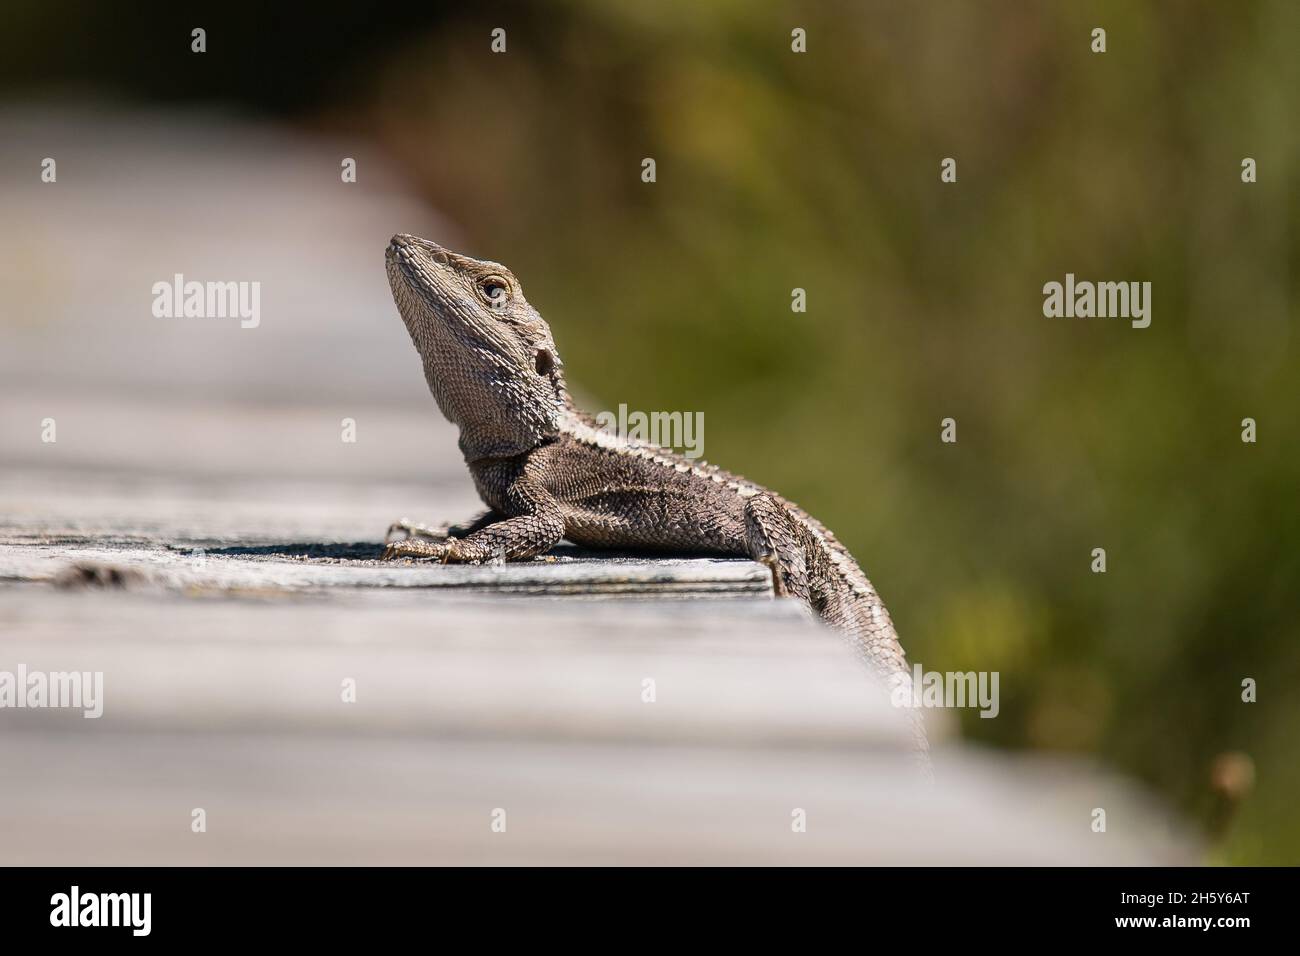 A water dragon on a boardwalk, photographed near Stanwell Tops, NSW Australia Stock Photo